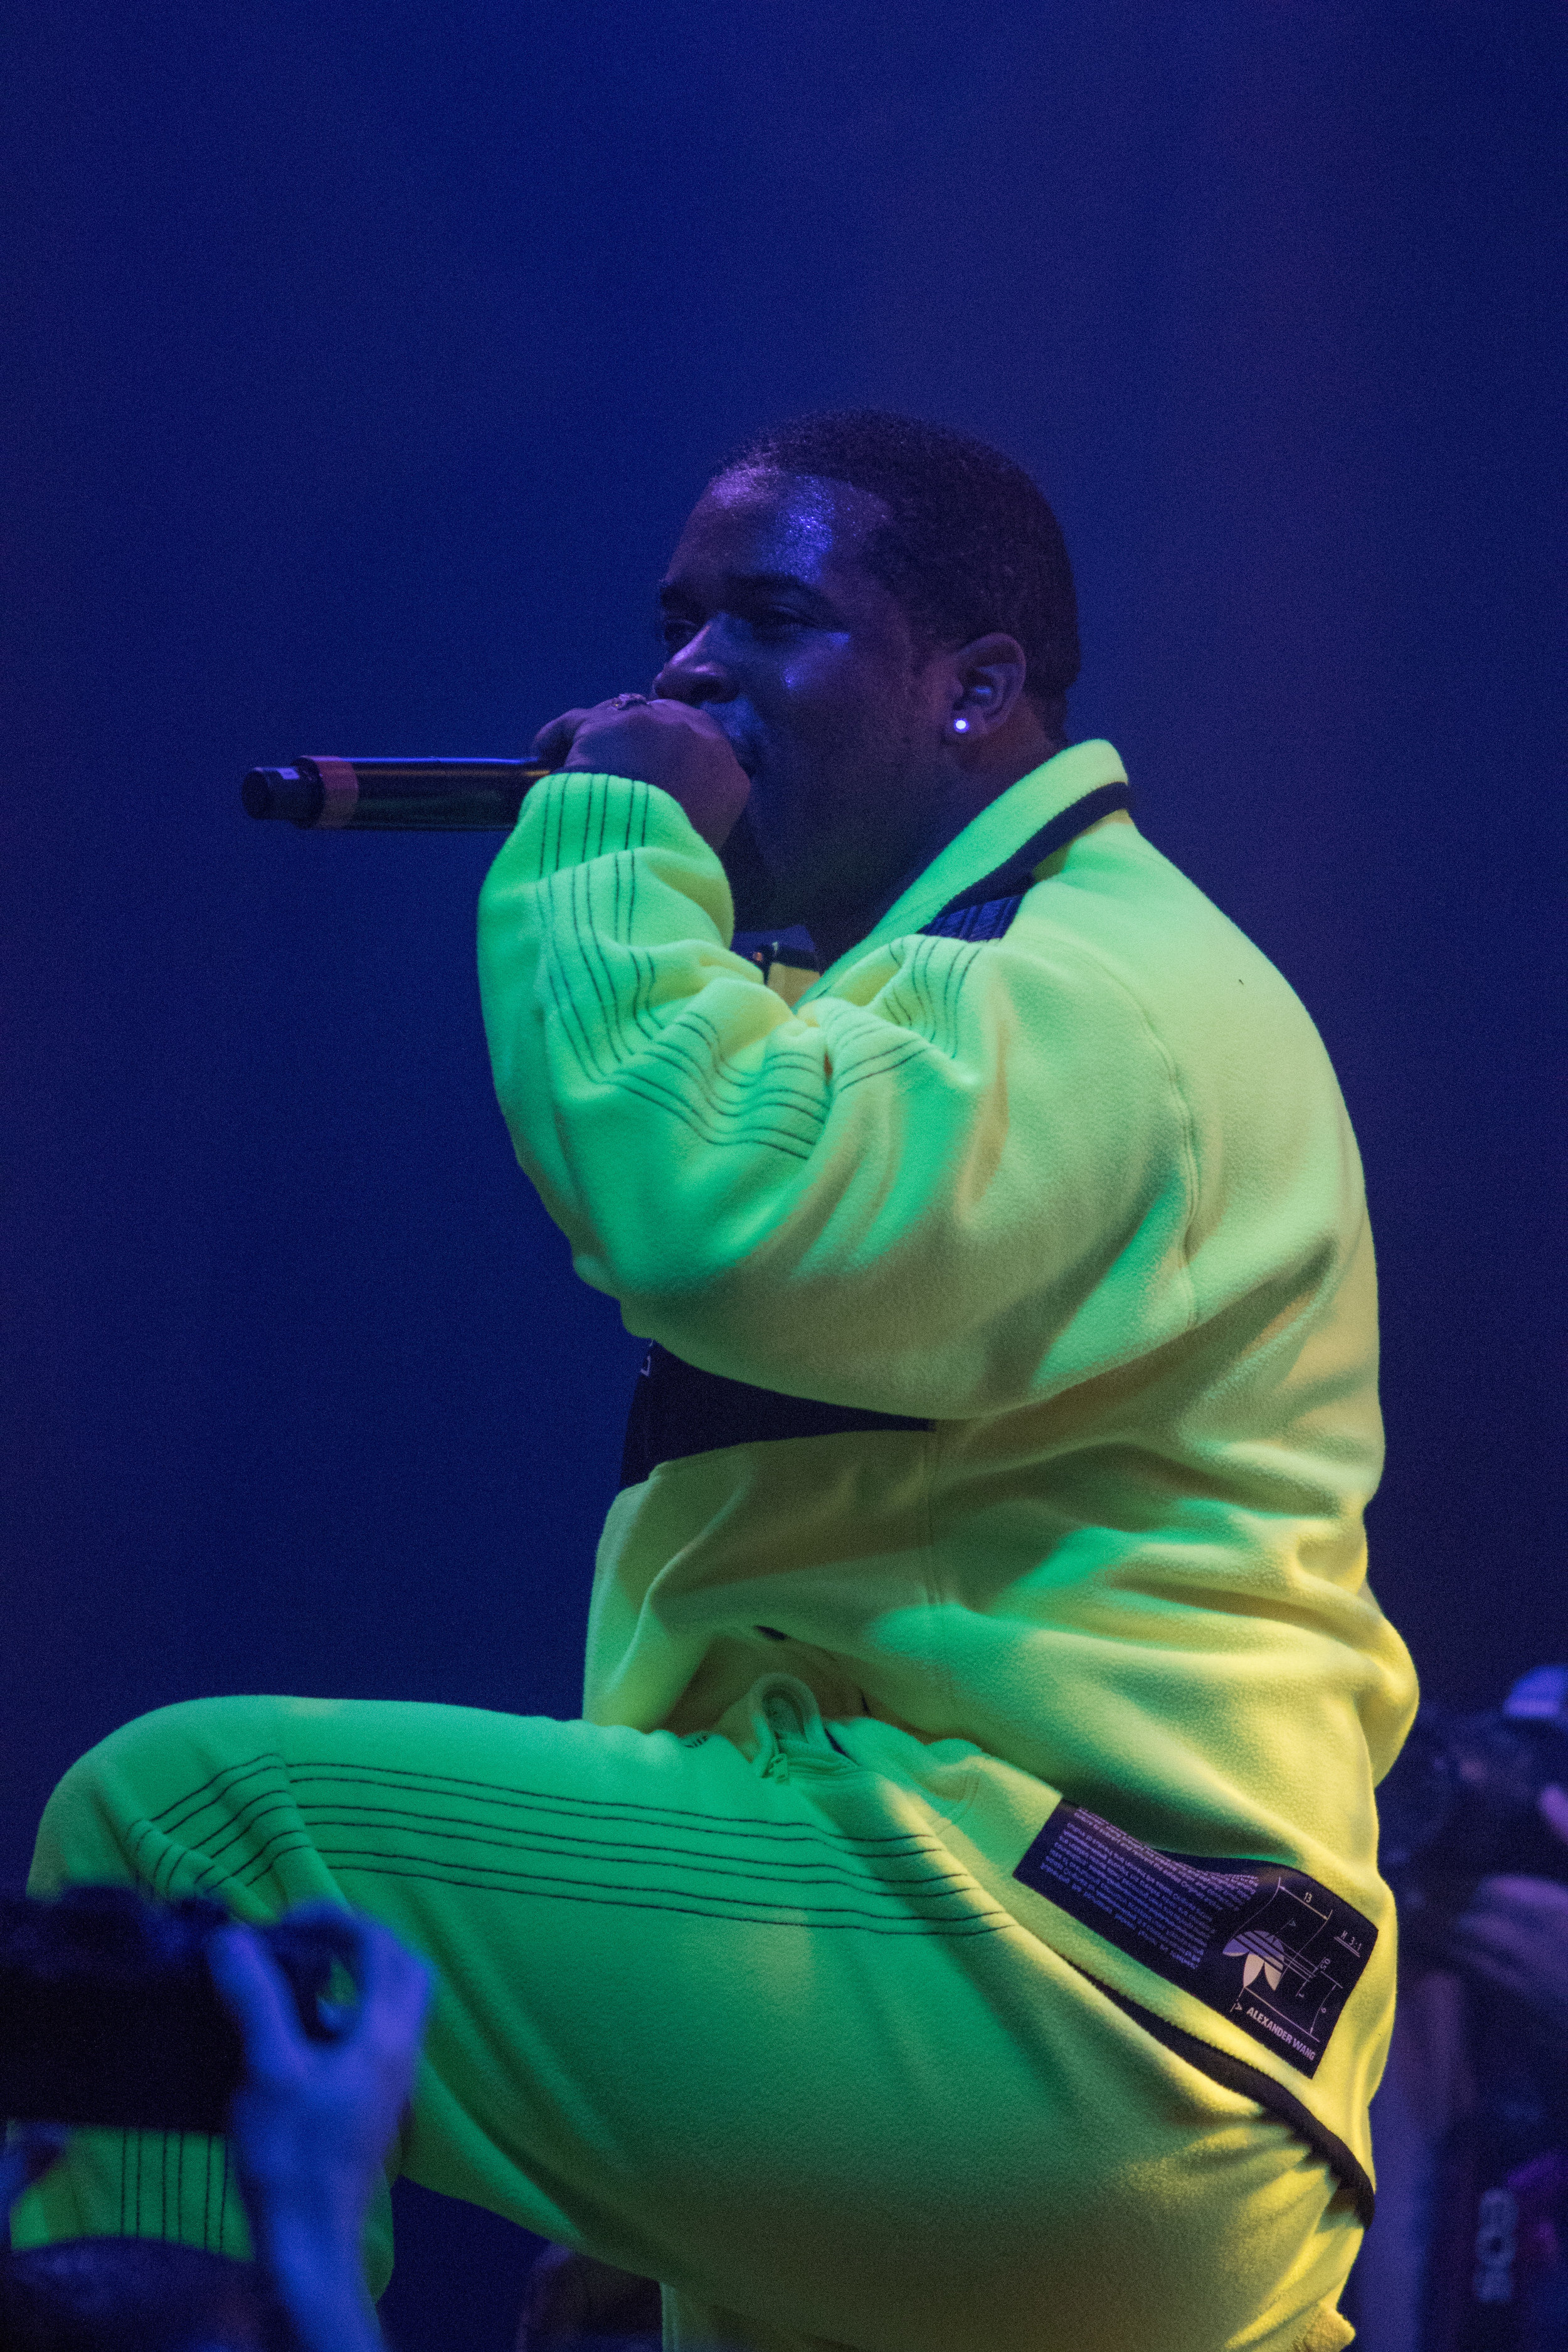  A$AP Ferg (Darold D. Brown Ferguson Jr.) performs "Shabba Ranks" at the Pigeons and Planes Stage at Complexcon. Ferguson was one of the many performers at the event which hosted numerous stage performances, booths with merchandise, discussion panels